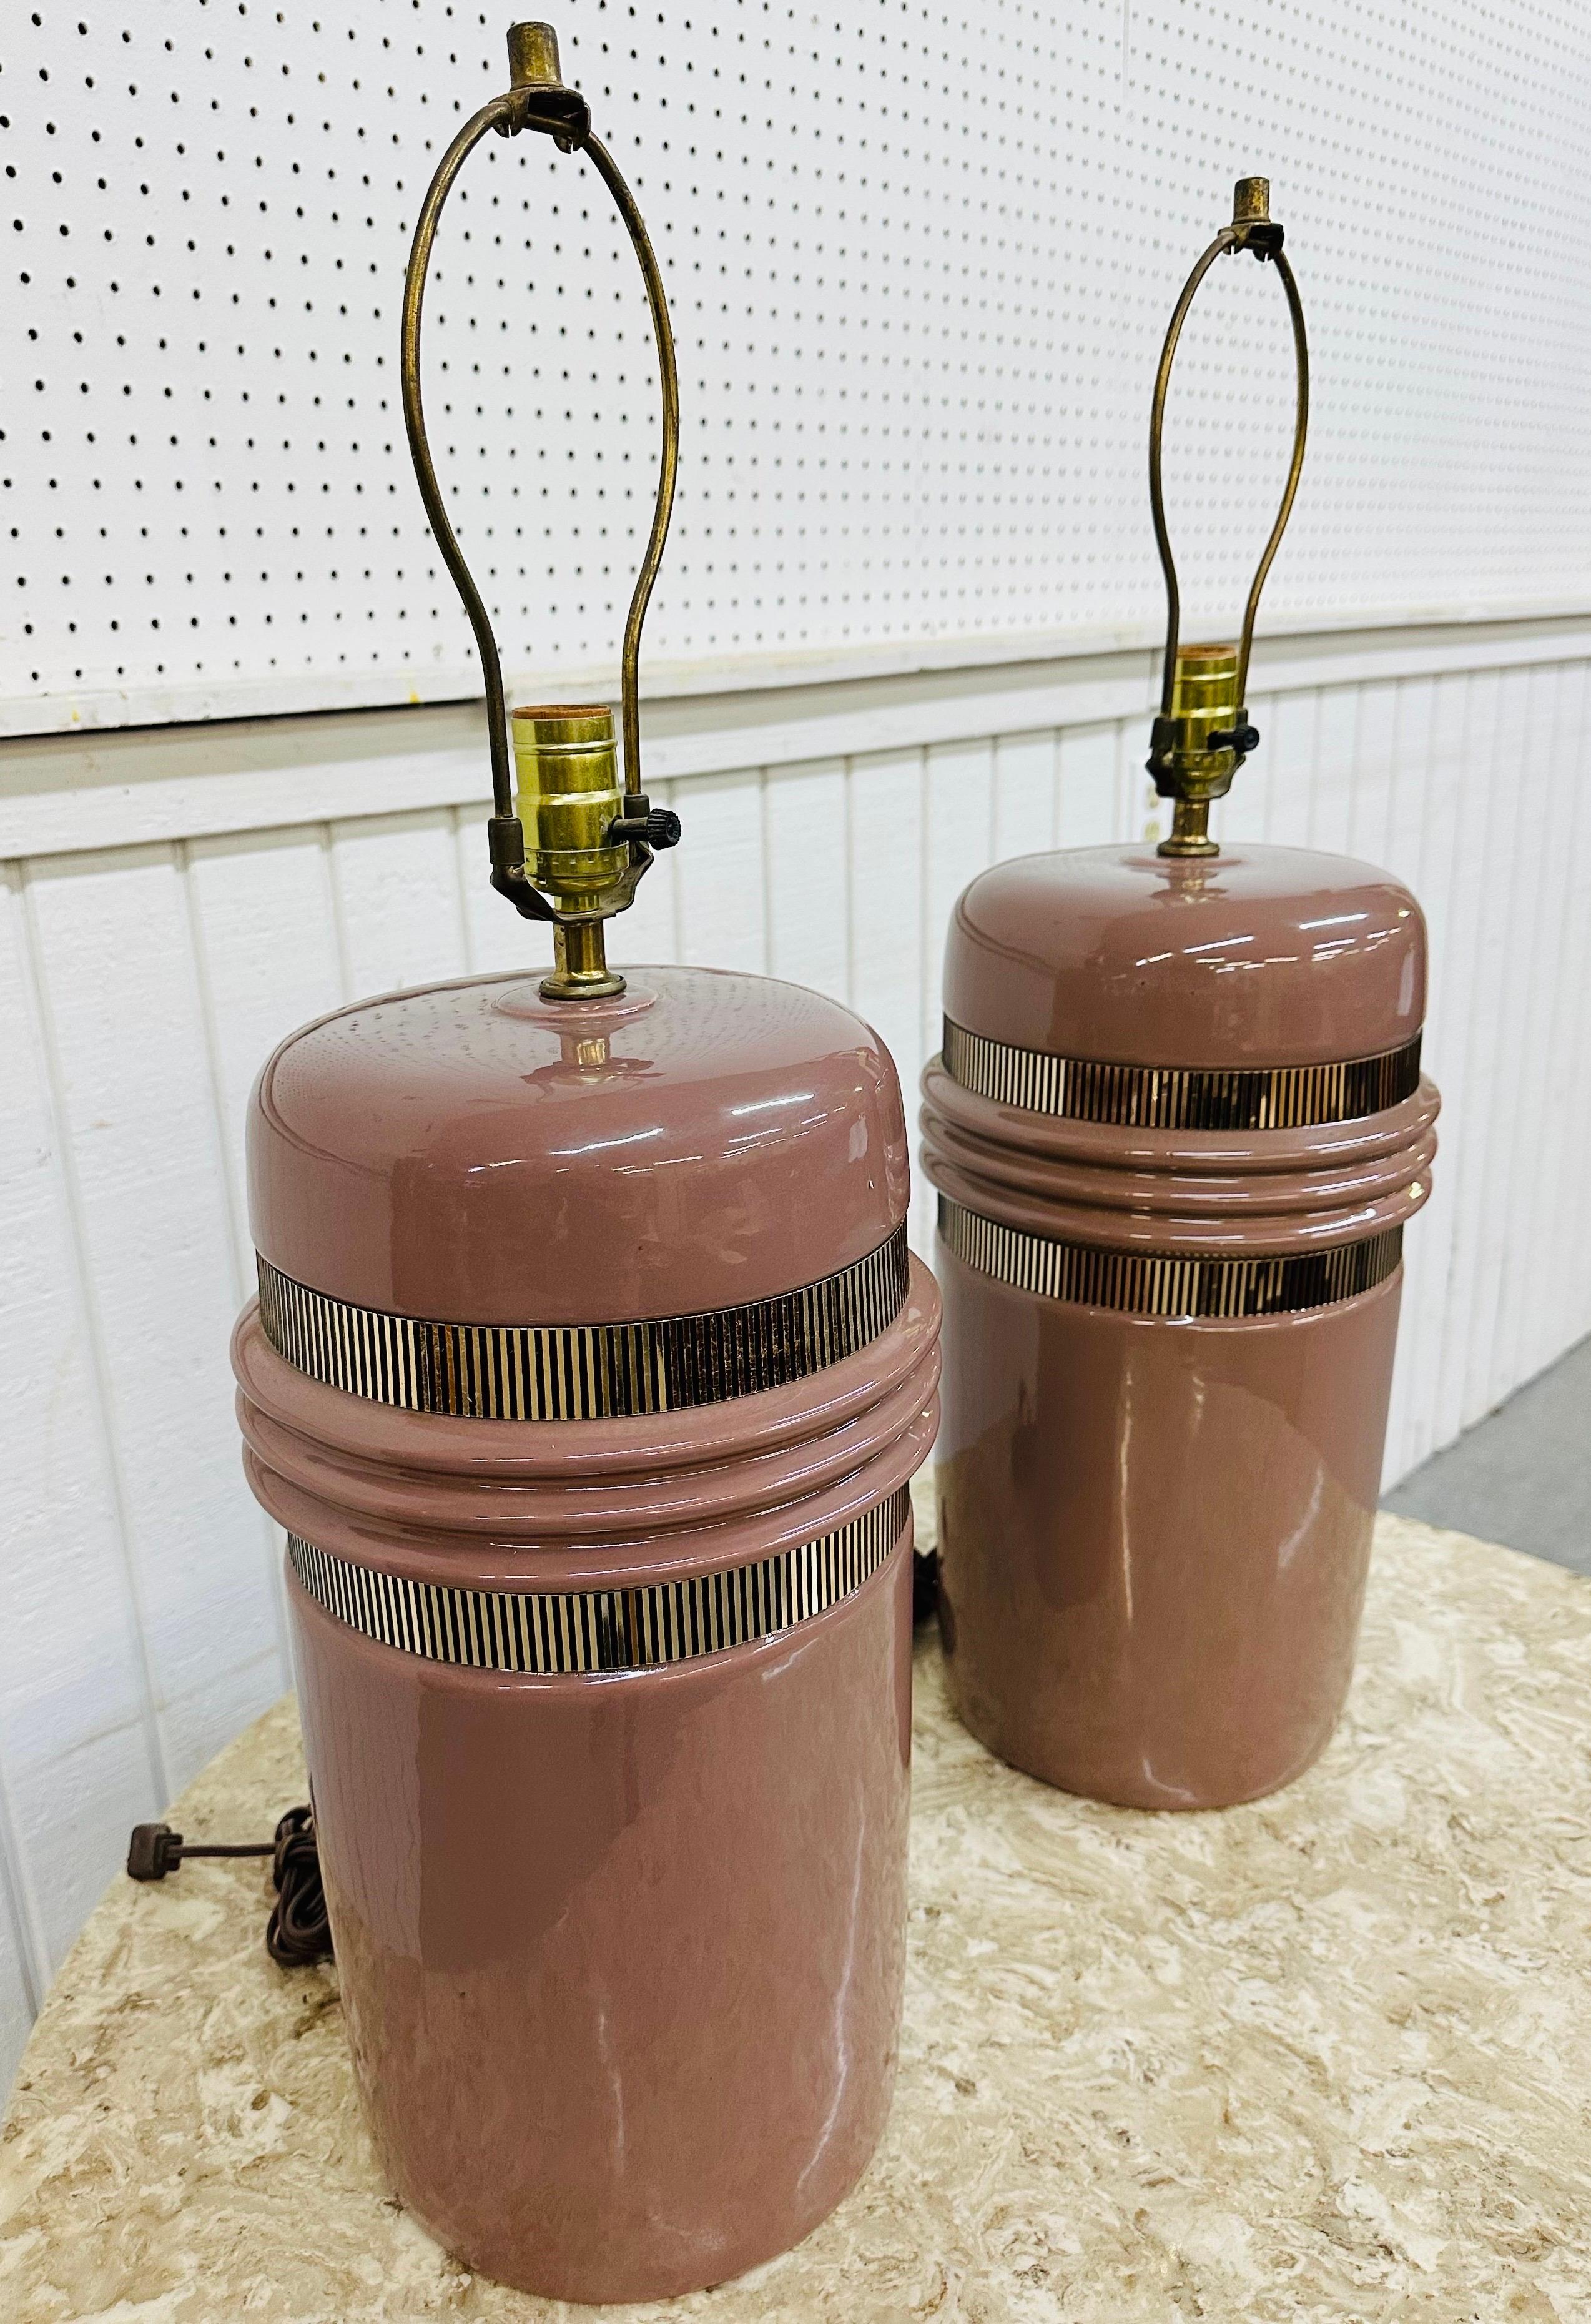 This listing is for a pair of Postmodern Pink & Brass Table Lamps. Featuring pink ceramic bodies, brass wrapped accents, original harps and cords. This is an exceptional combination of quality and modern design!